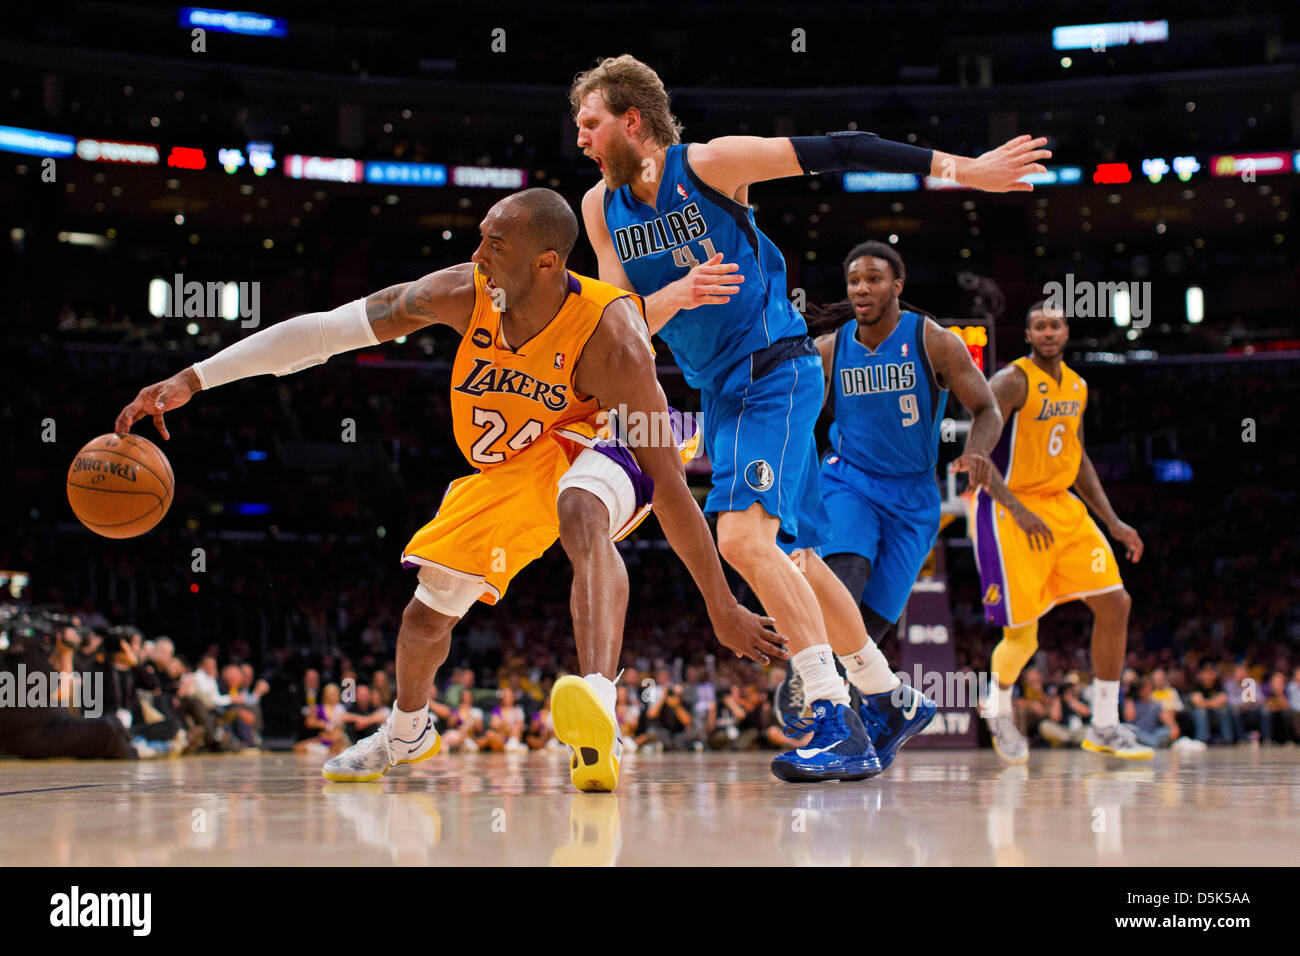 Los Angeles, California, USA. 2nd April 2013. Guard (24) Kobe Bryant of the Los Angeles Lakers has the ball knocked out his hand by (41) Dirk Nowitzki of the Dallas Mavericks during the second half of the Lakers 101-81 victory over the Mavericks at the STAPLES Center in Los Angeles, CA. Credit: Action Plus Sports Images / Alamy Live News Stock Photo